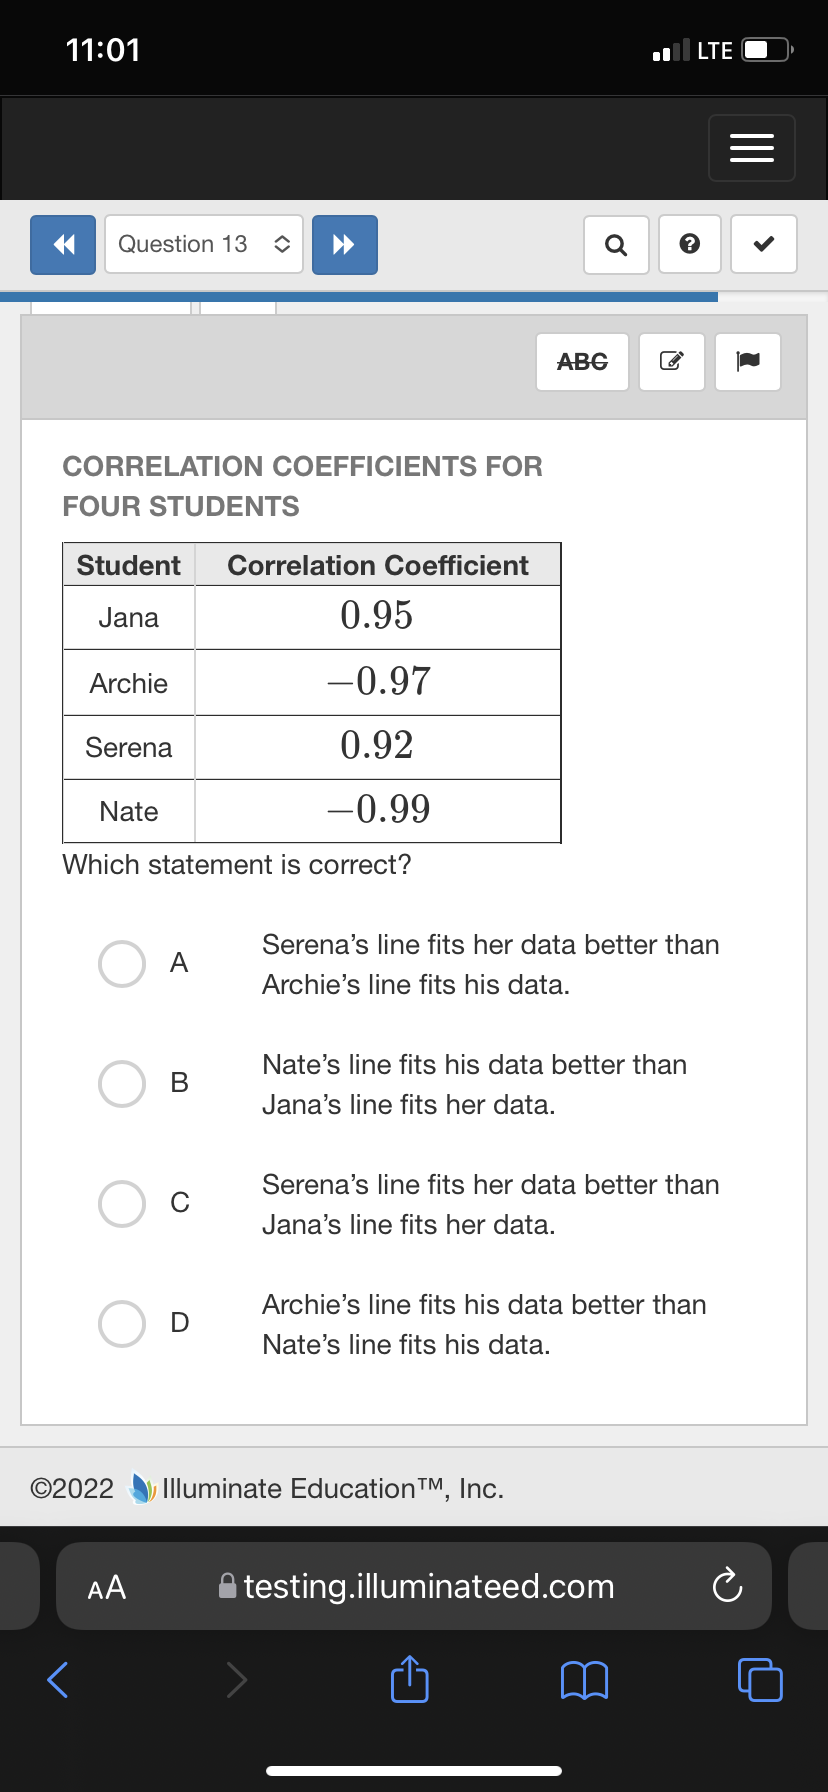 11:01
LTE
Question 13
Q
АBG
CORRELATION COEFFICIENTS FOR
FOUR STUDENTS
Student
Correlation Coefficient
Jana
0.95
Archie
-0.97
Serena
0.92
Nate
-0.99
Which statement is correct?
Serena's line fits her data better than
A
Archie's line fits his data.
Nate's line fits his data better than
Jana's line fits her data.
Serena's line fits her data better than
Jana's line fits her data.
Archie's line fits his data better than
Nate's line fits his data.
©2022
Illuminate EducationTM, Inc.
AA
testing.illuminateed.com
<>
